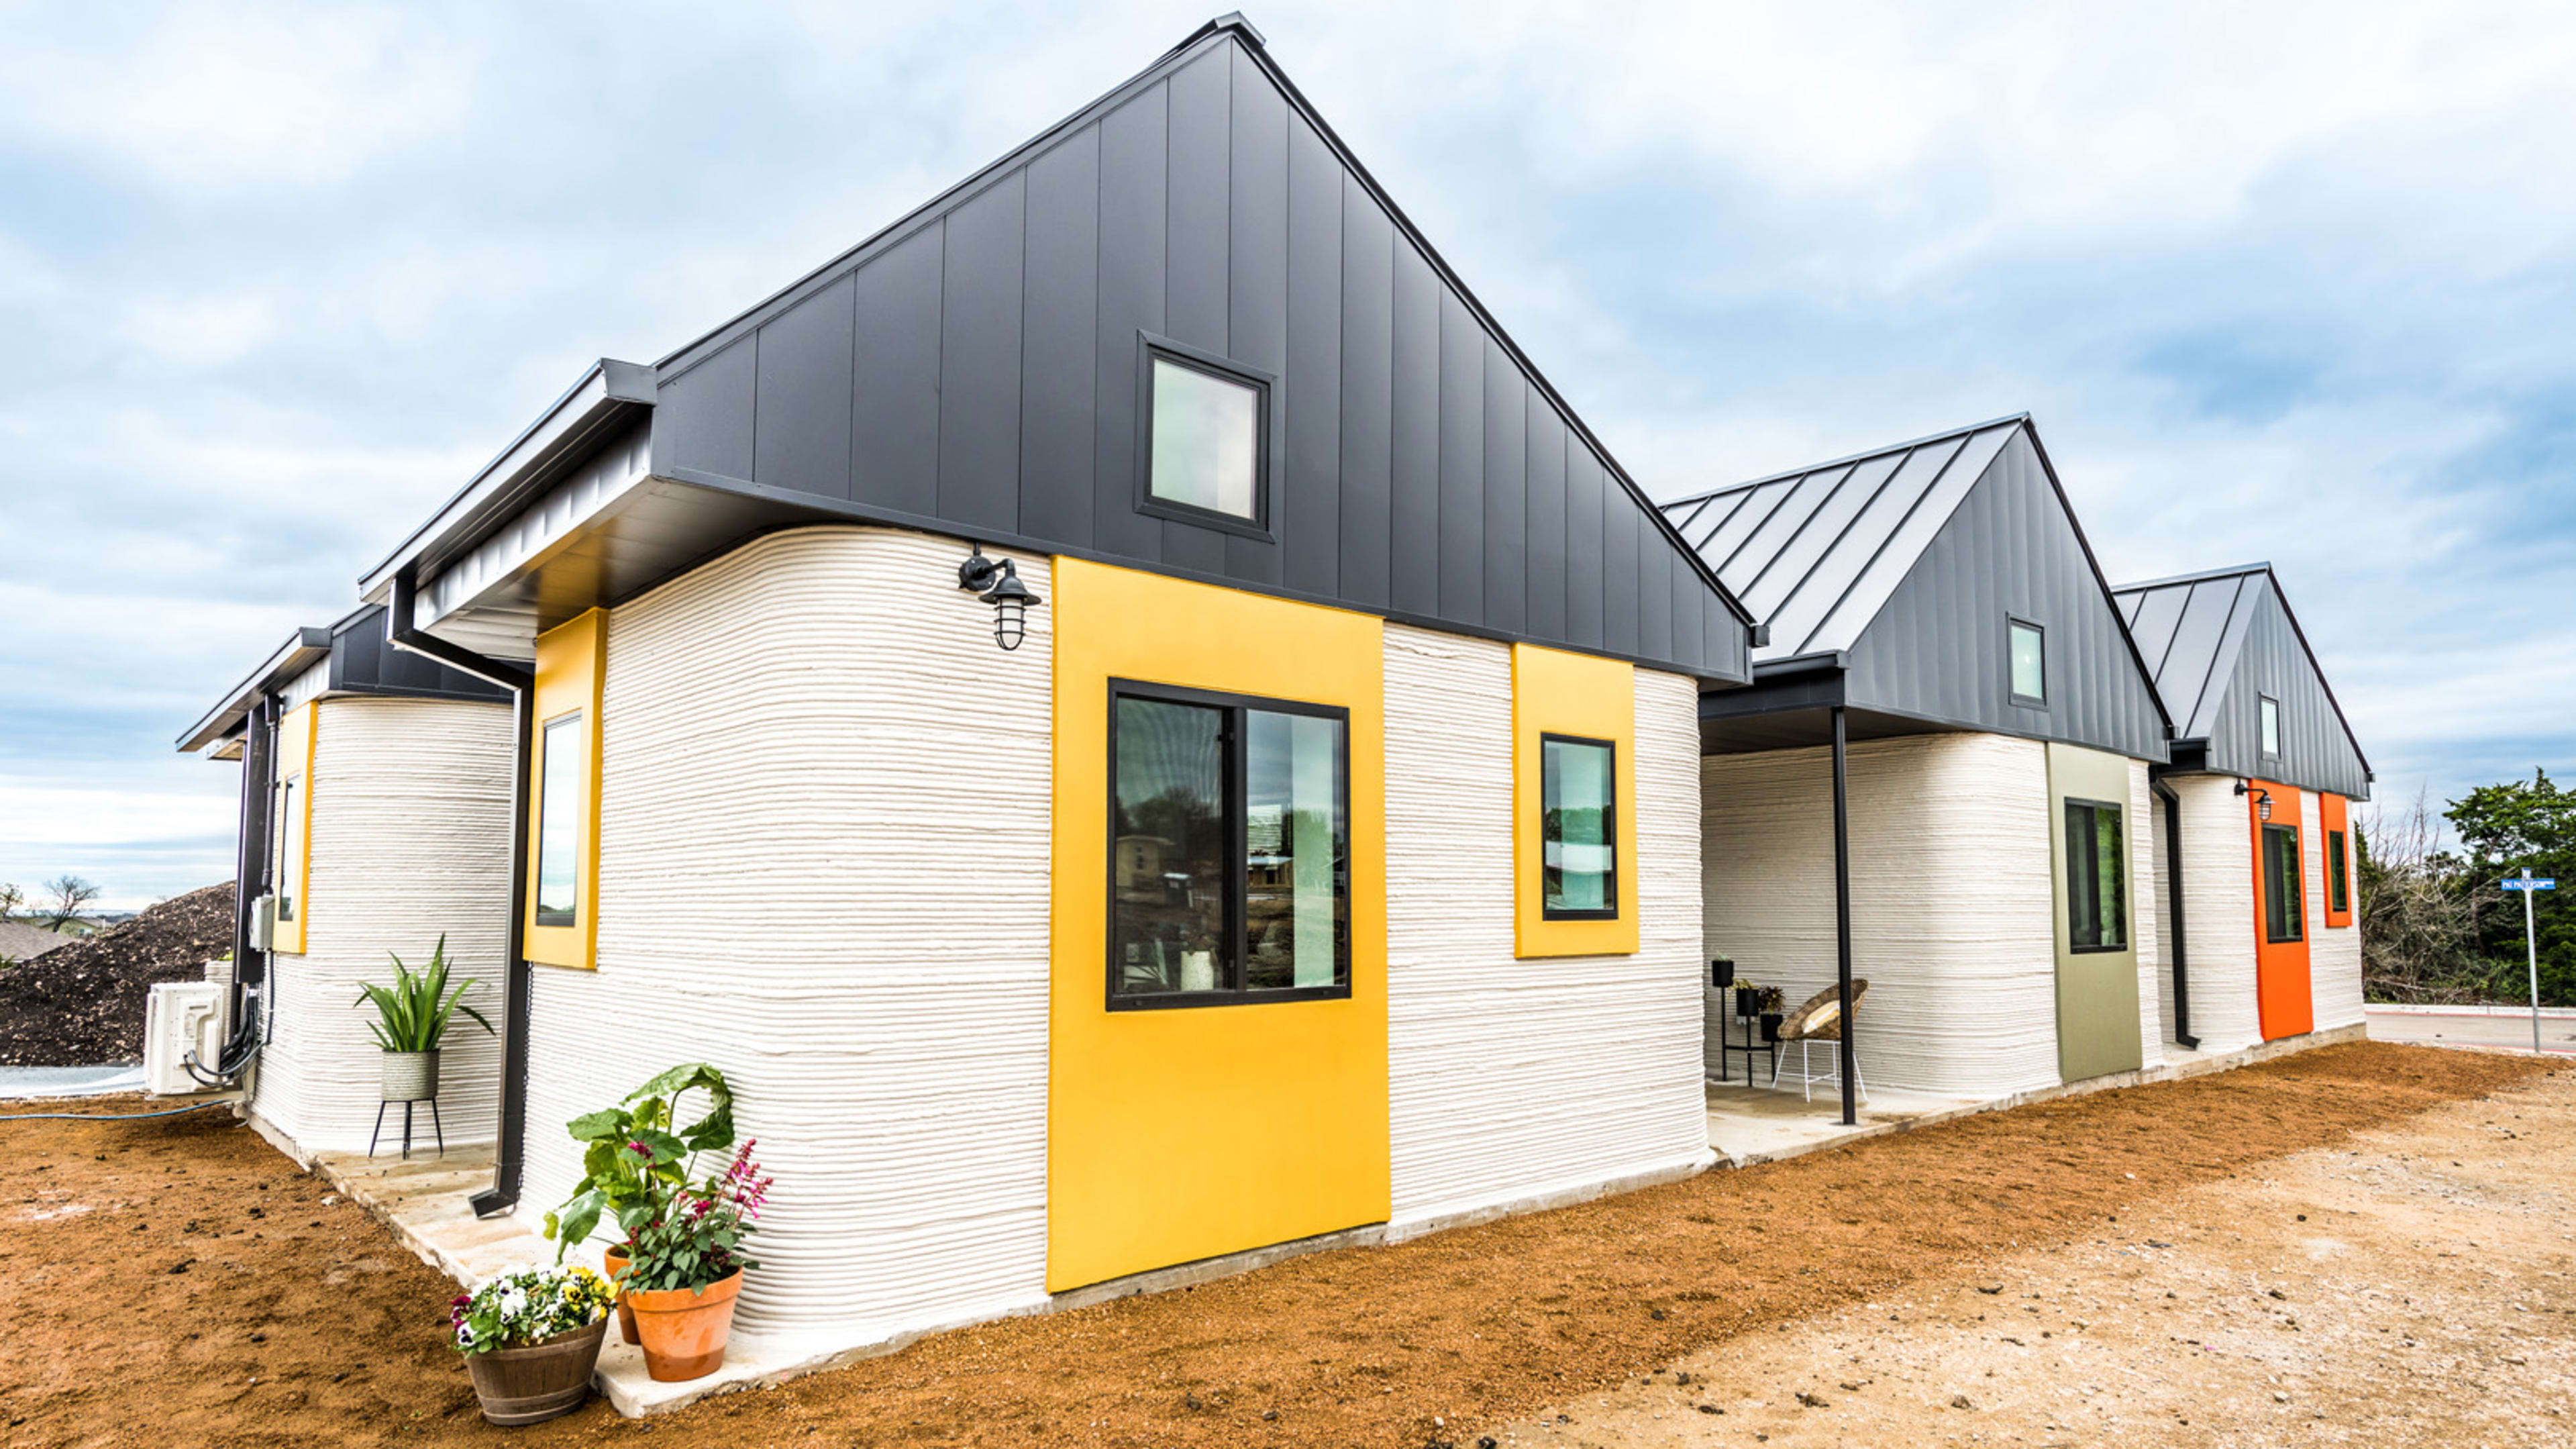 This village for the homeless just got a new addition: 3D-printed houses